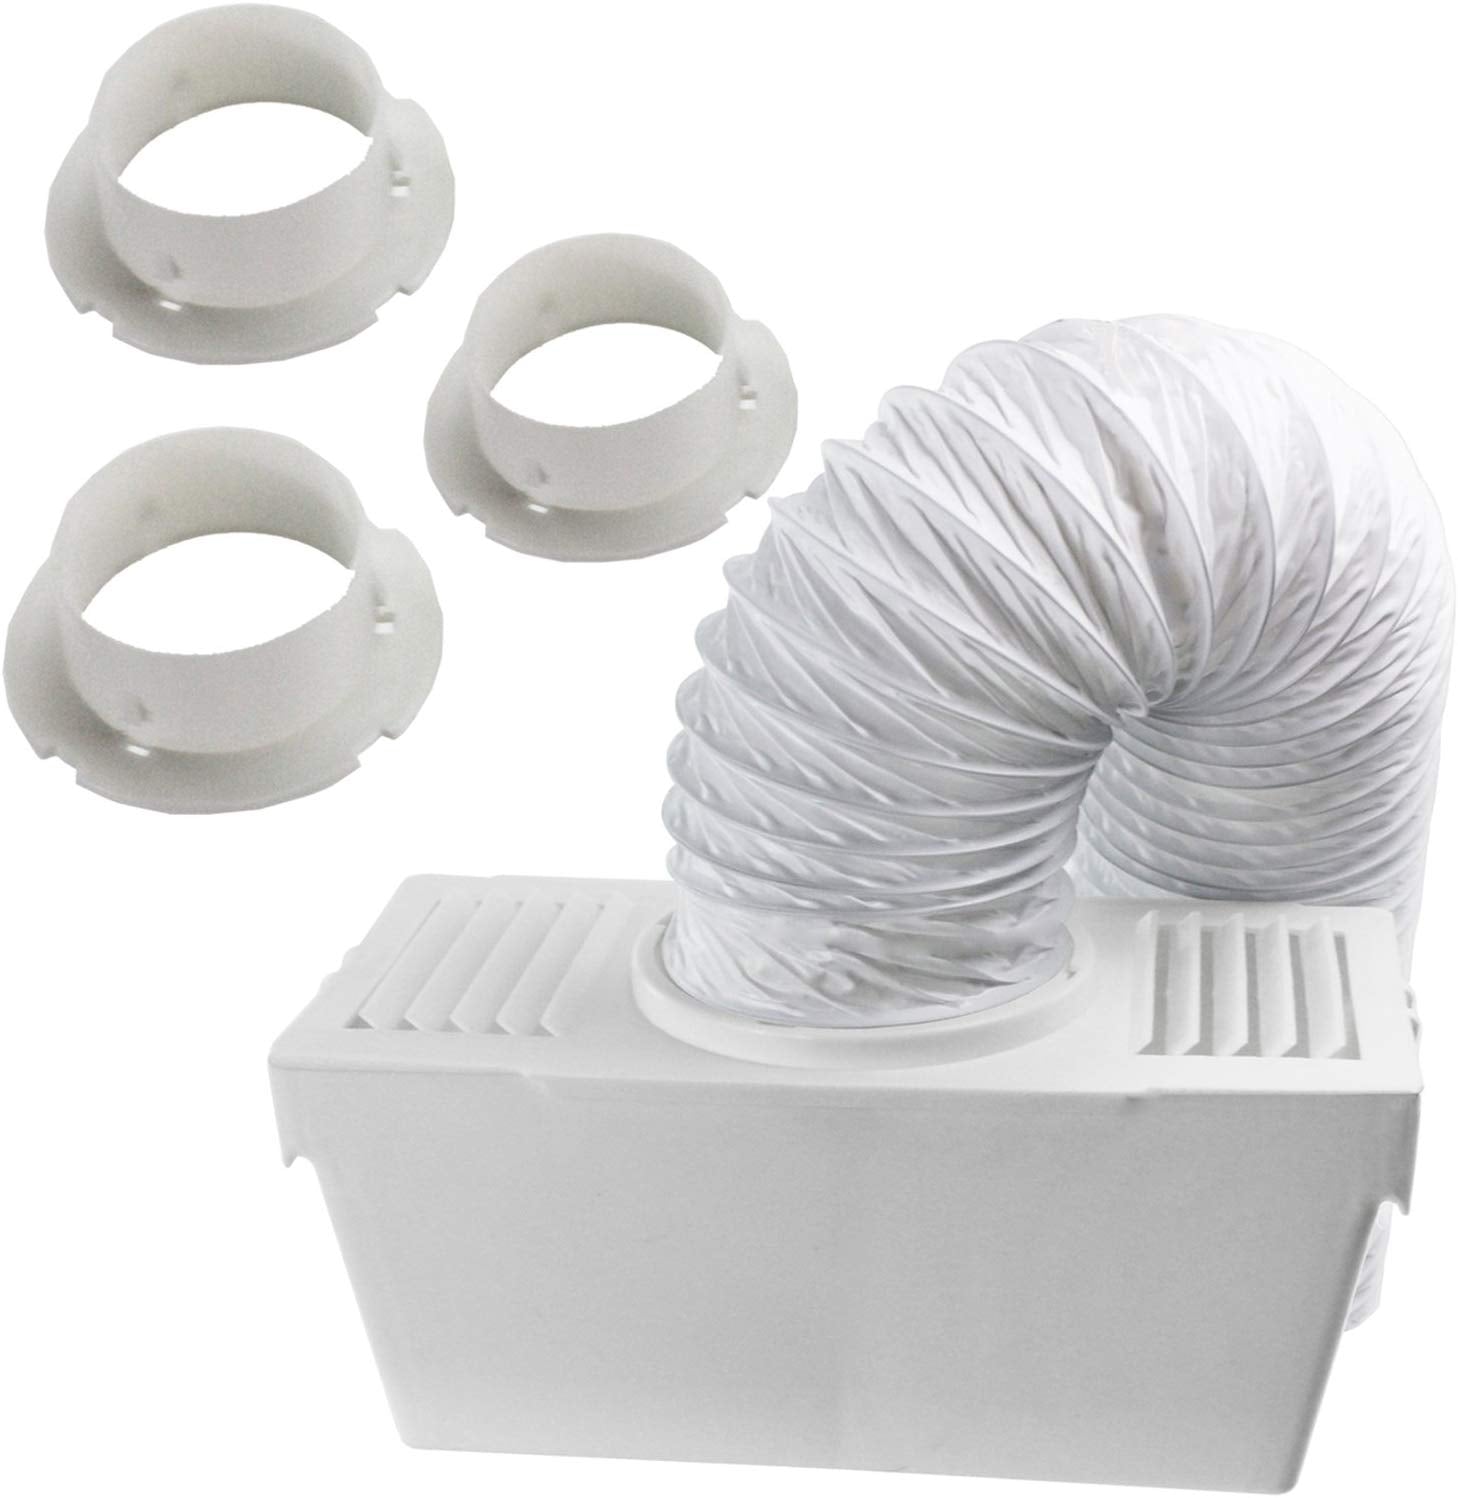 Vent Hose Condenser Kit with 3 x Adapters for Montpellier Tumble Dryer (1.2m)